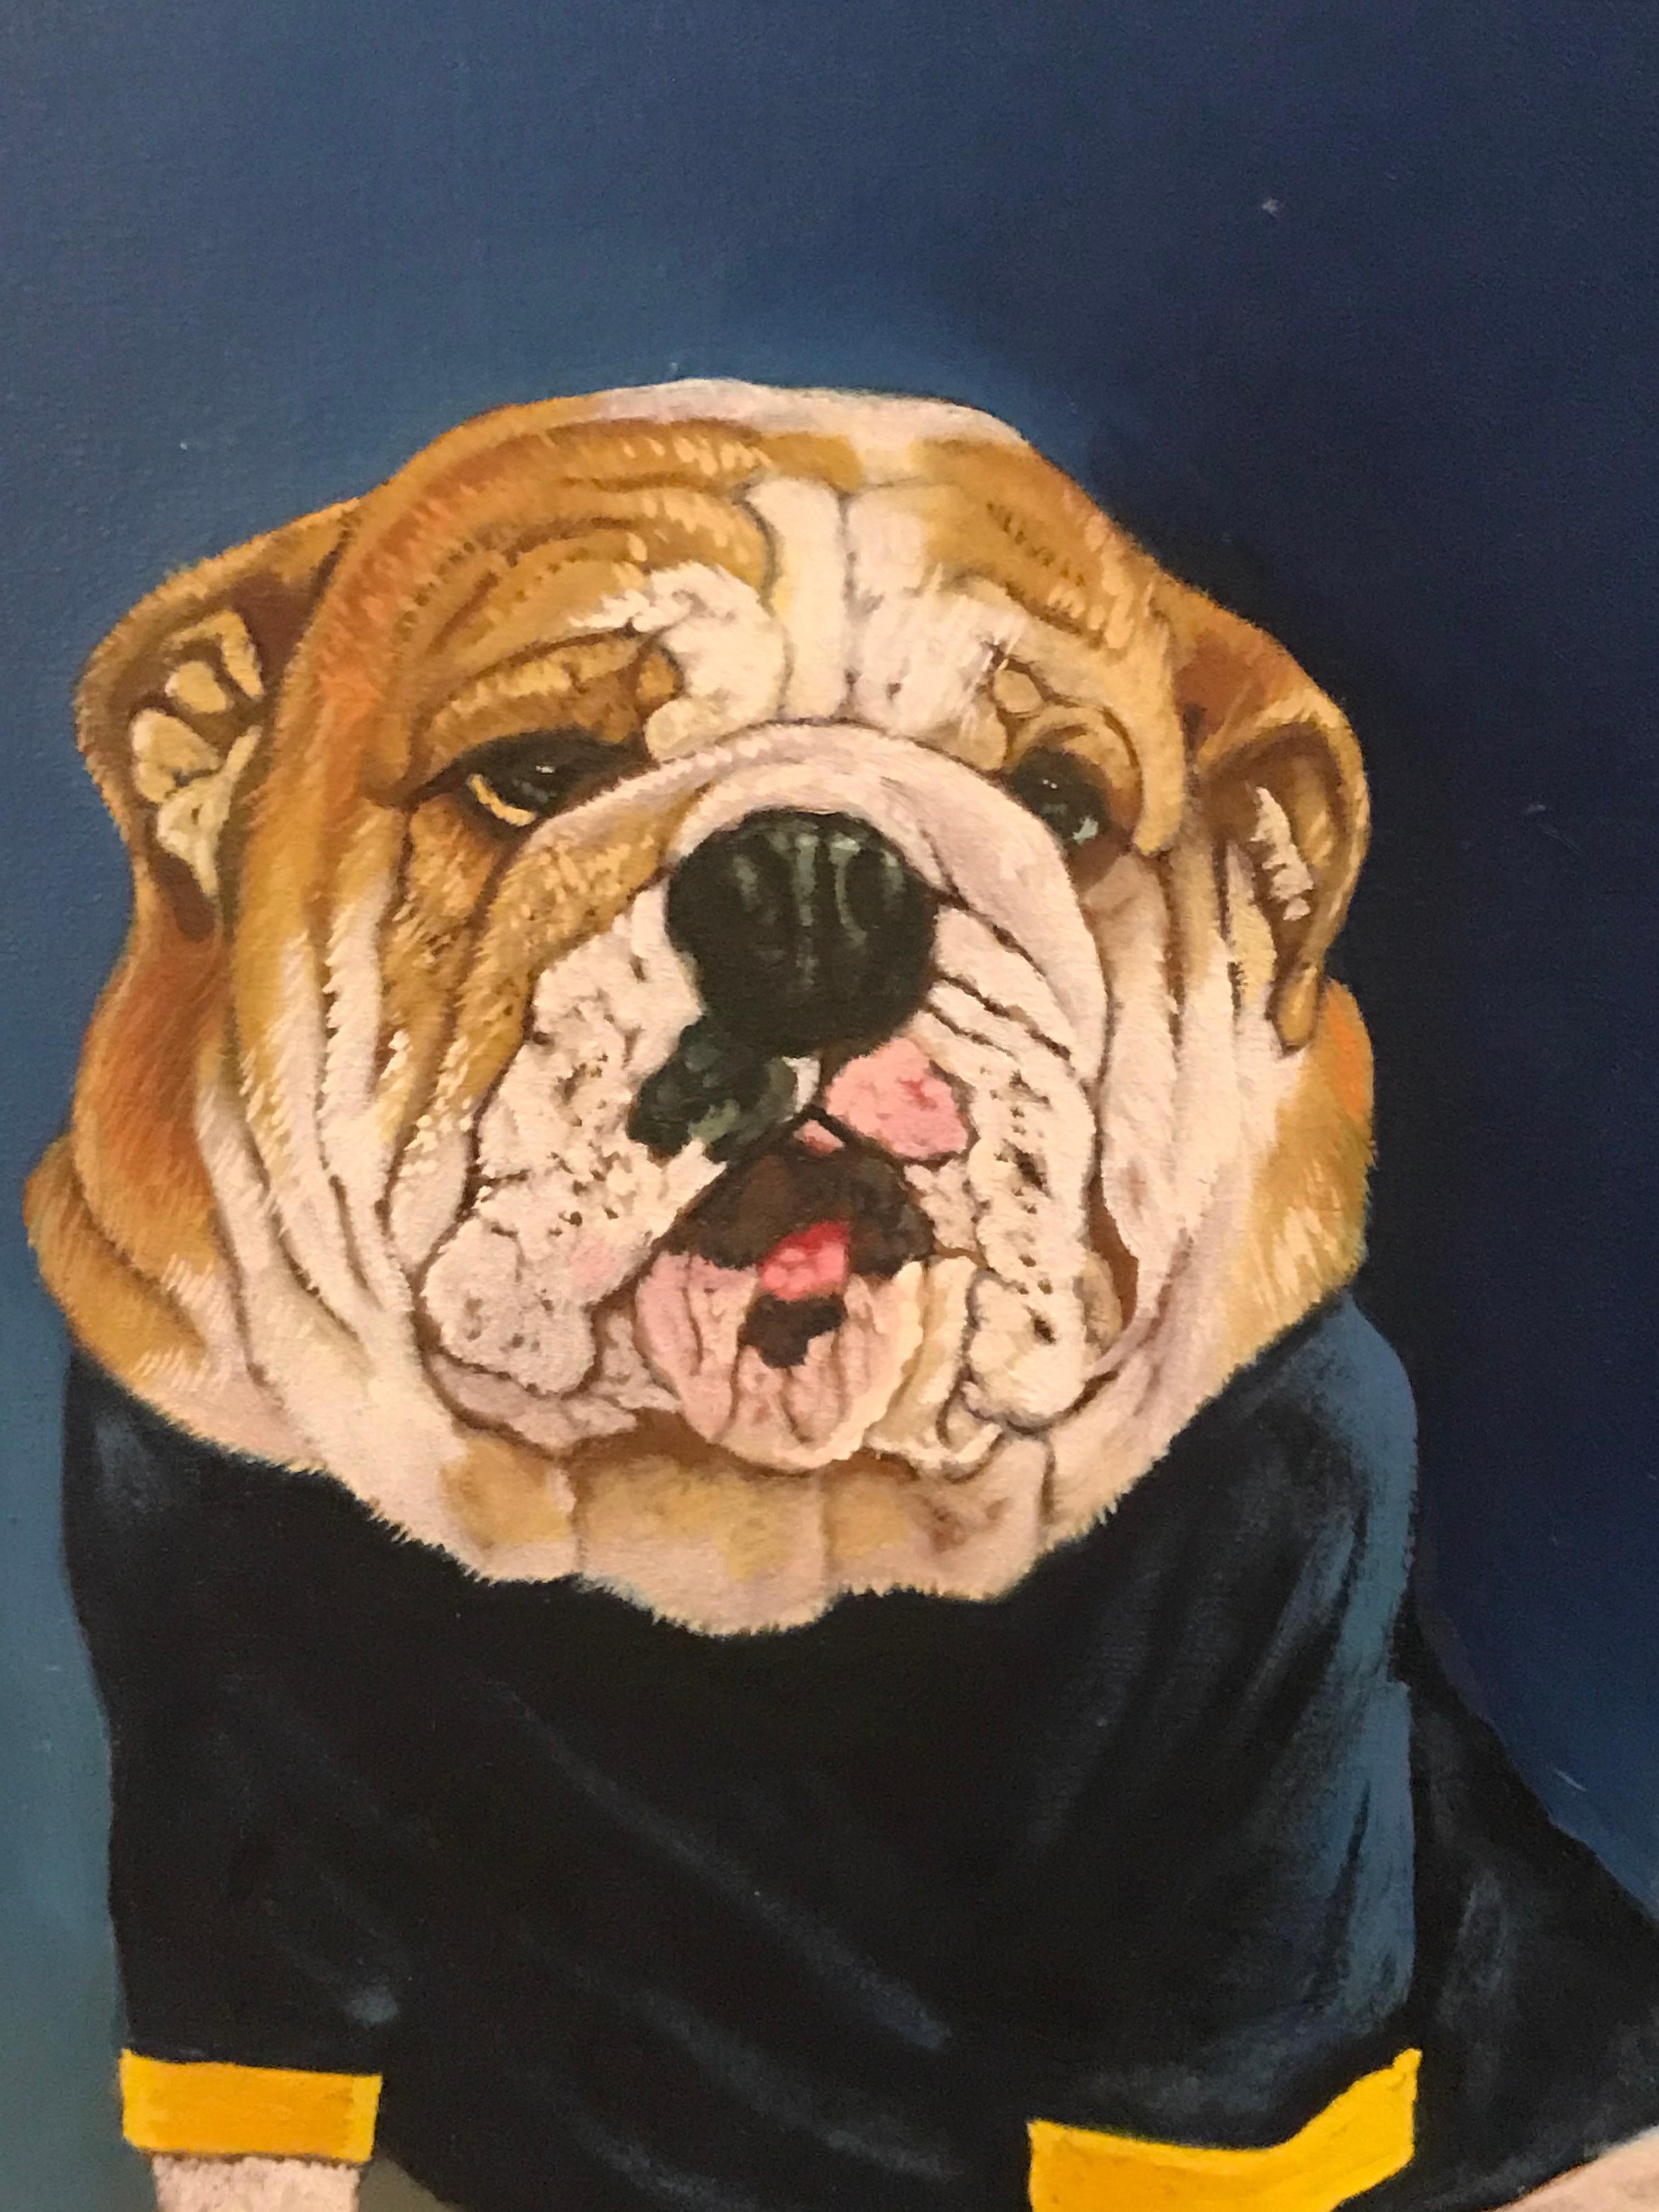 This oil painting on canvas from the 1960s captures the spirit of an English bulldog in all its glory. The signature is eligible.
The artist, whose signature is illegible, has captured the proud and confident expression of the bulldog perfectly, as